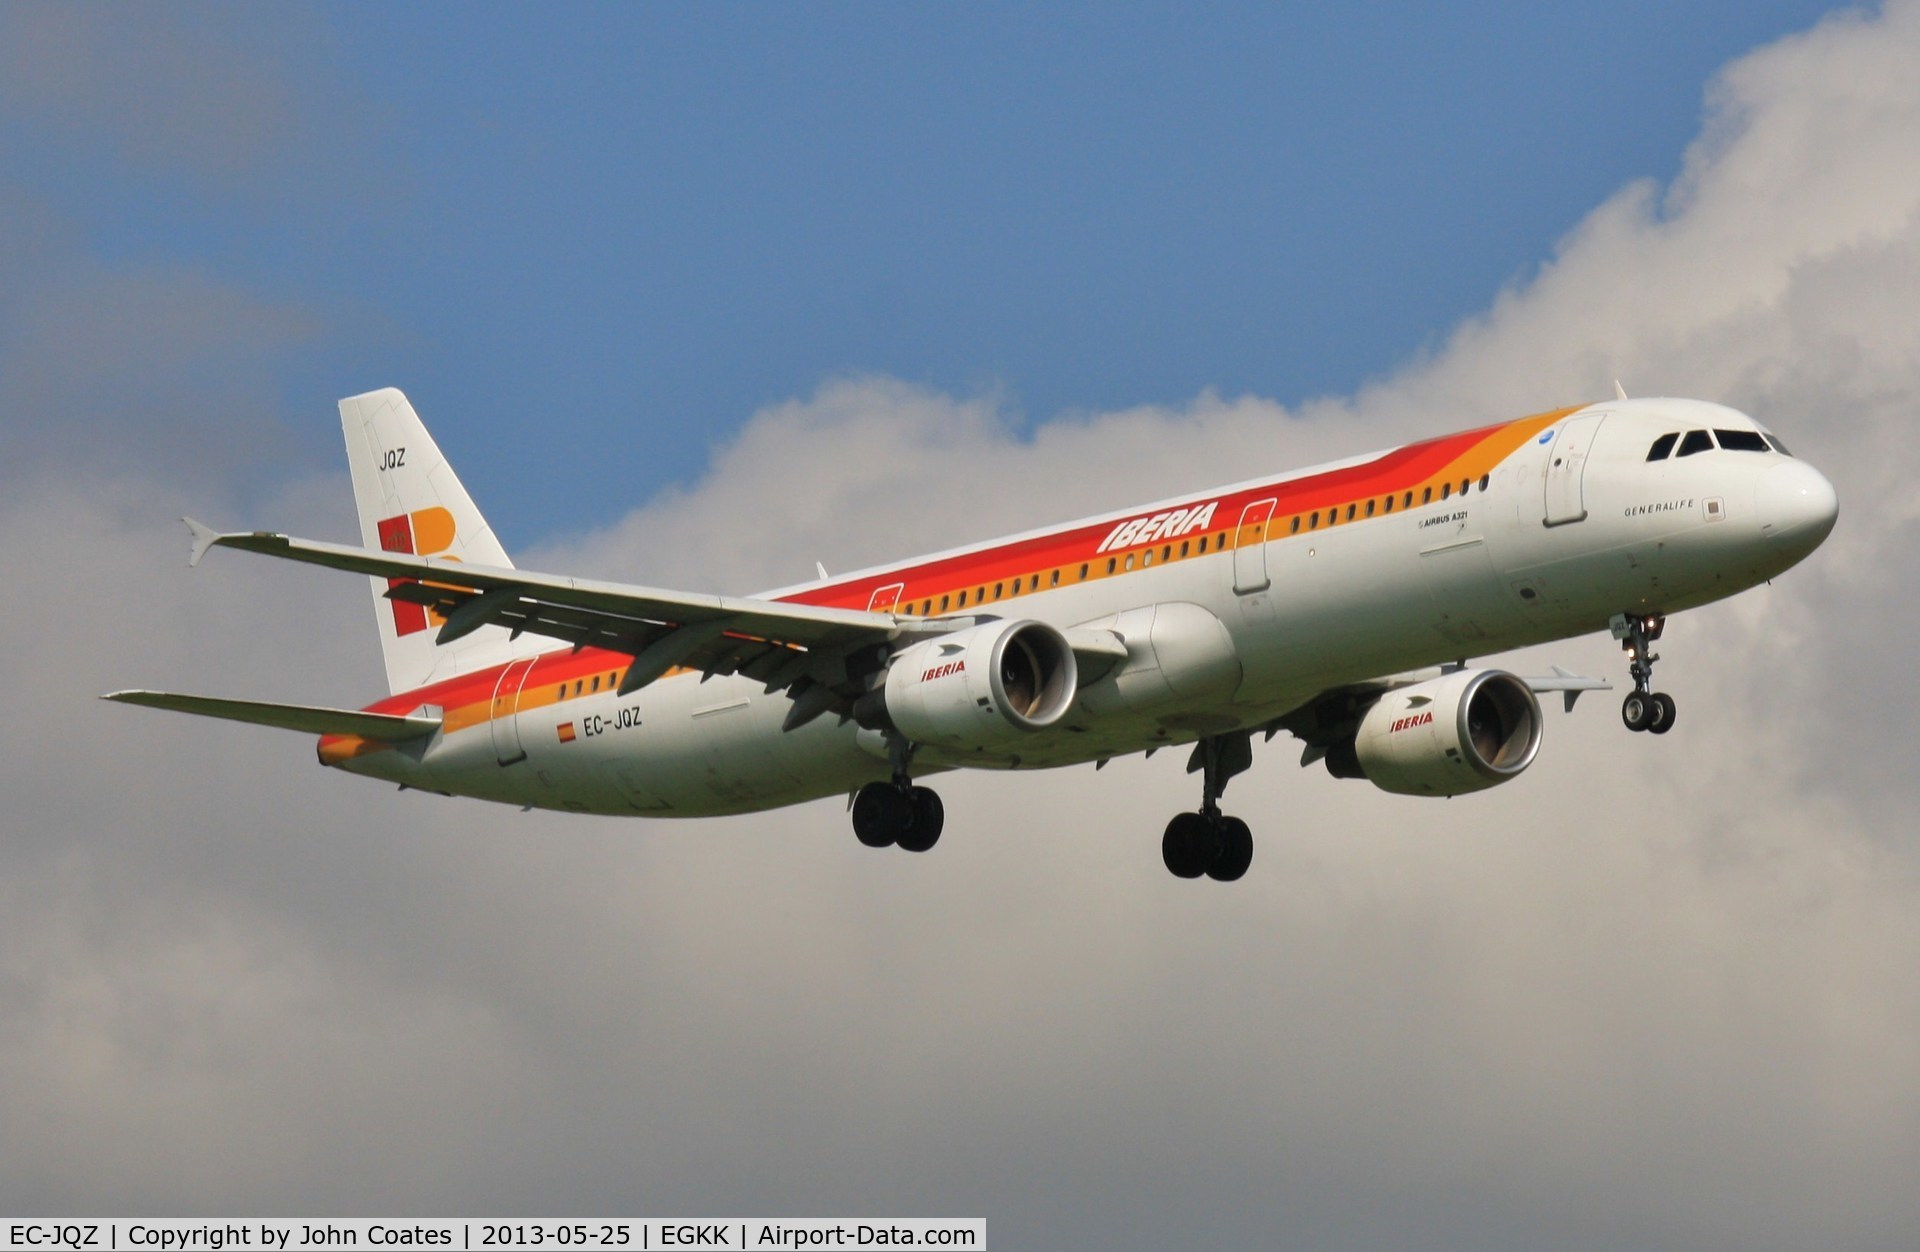 EC-JQZ, 2006 Airbus A321-211 C/N 2736, On approach to 08R